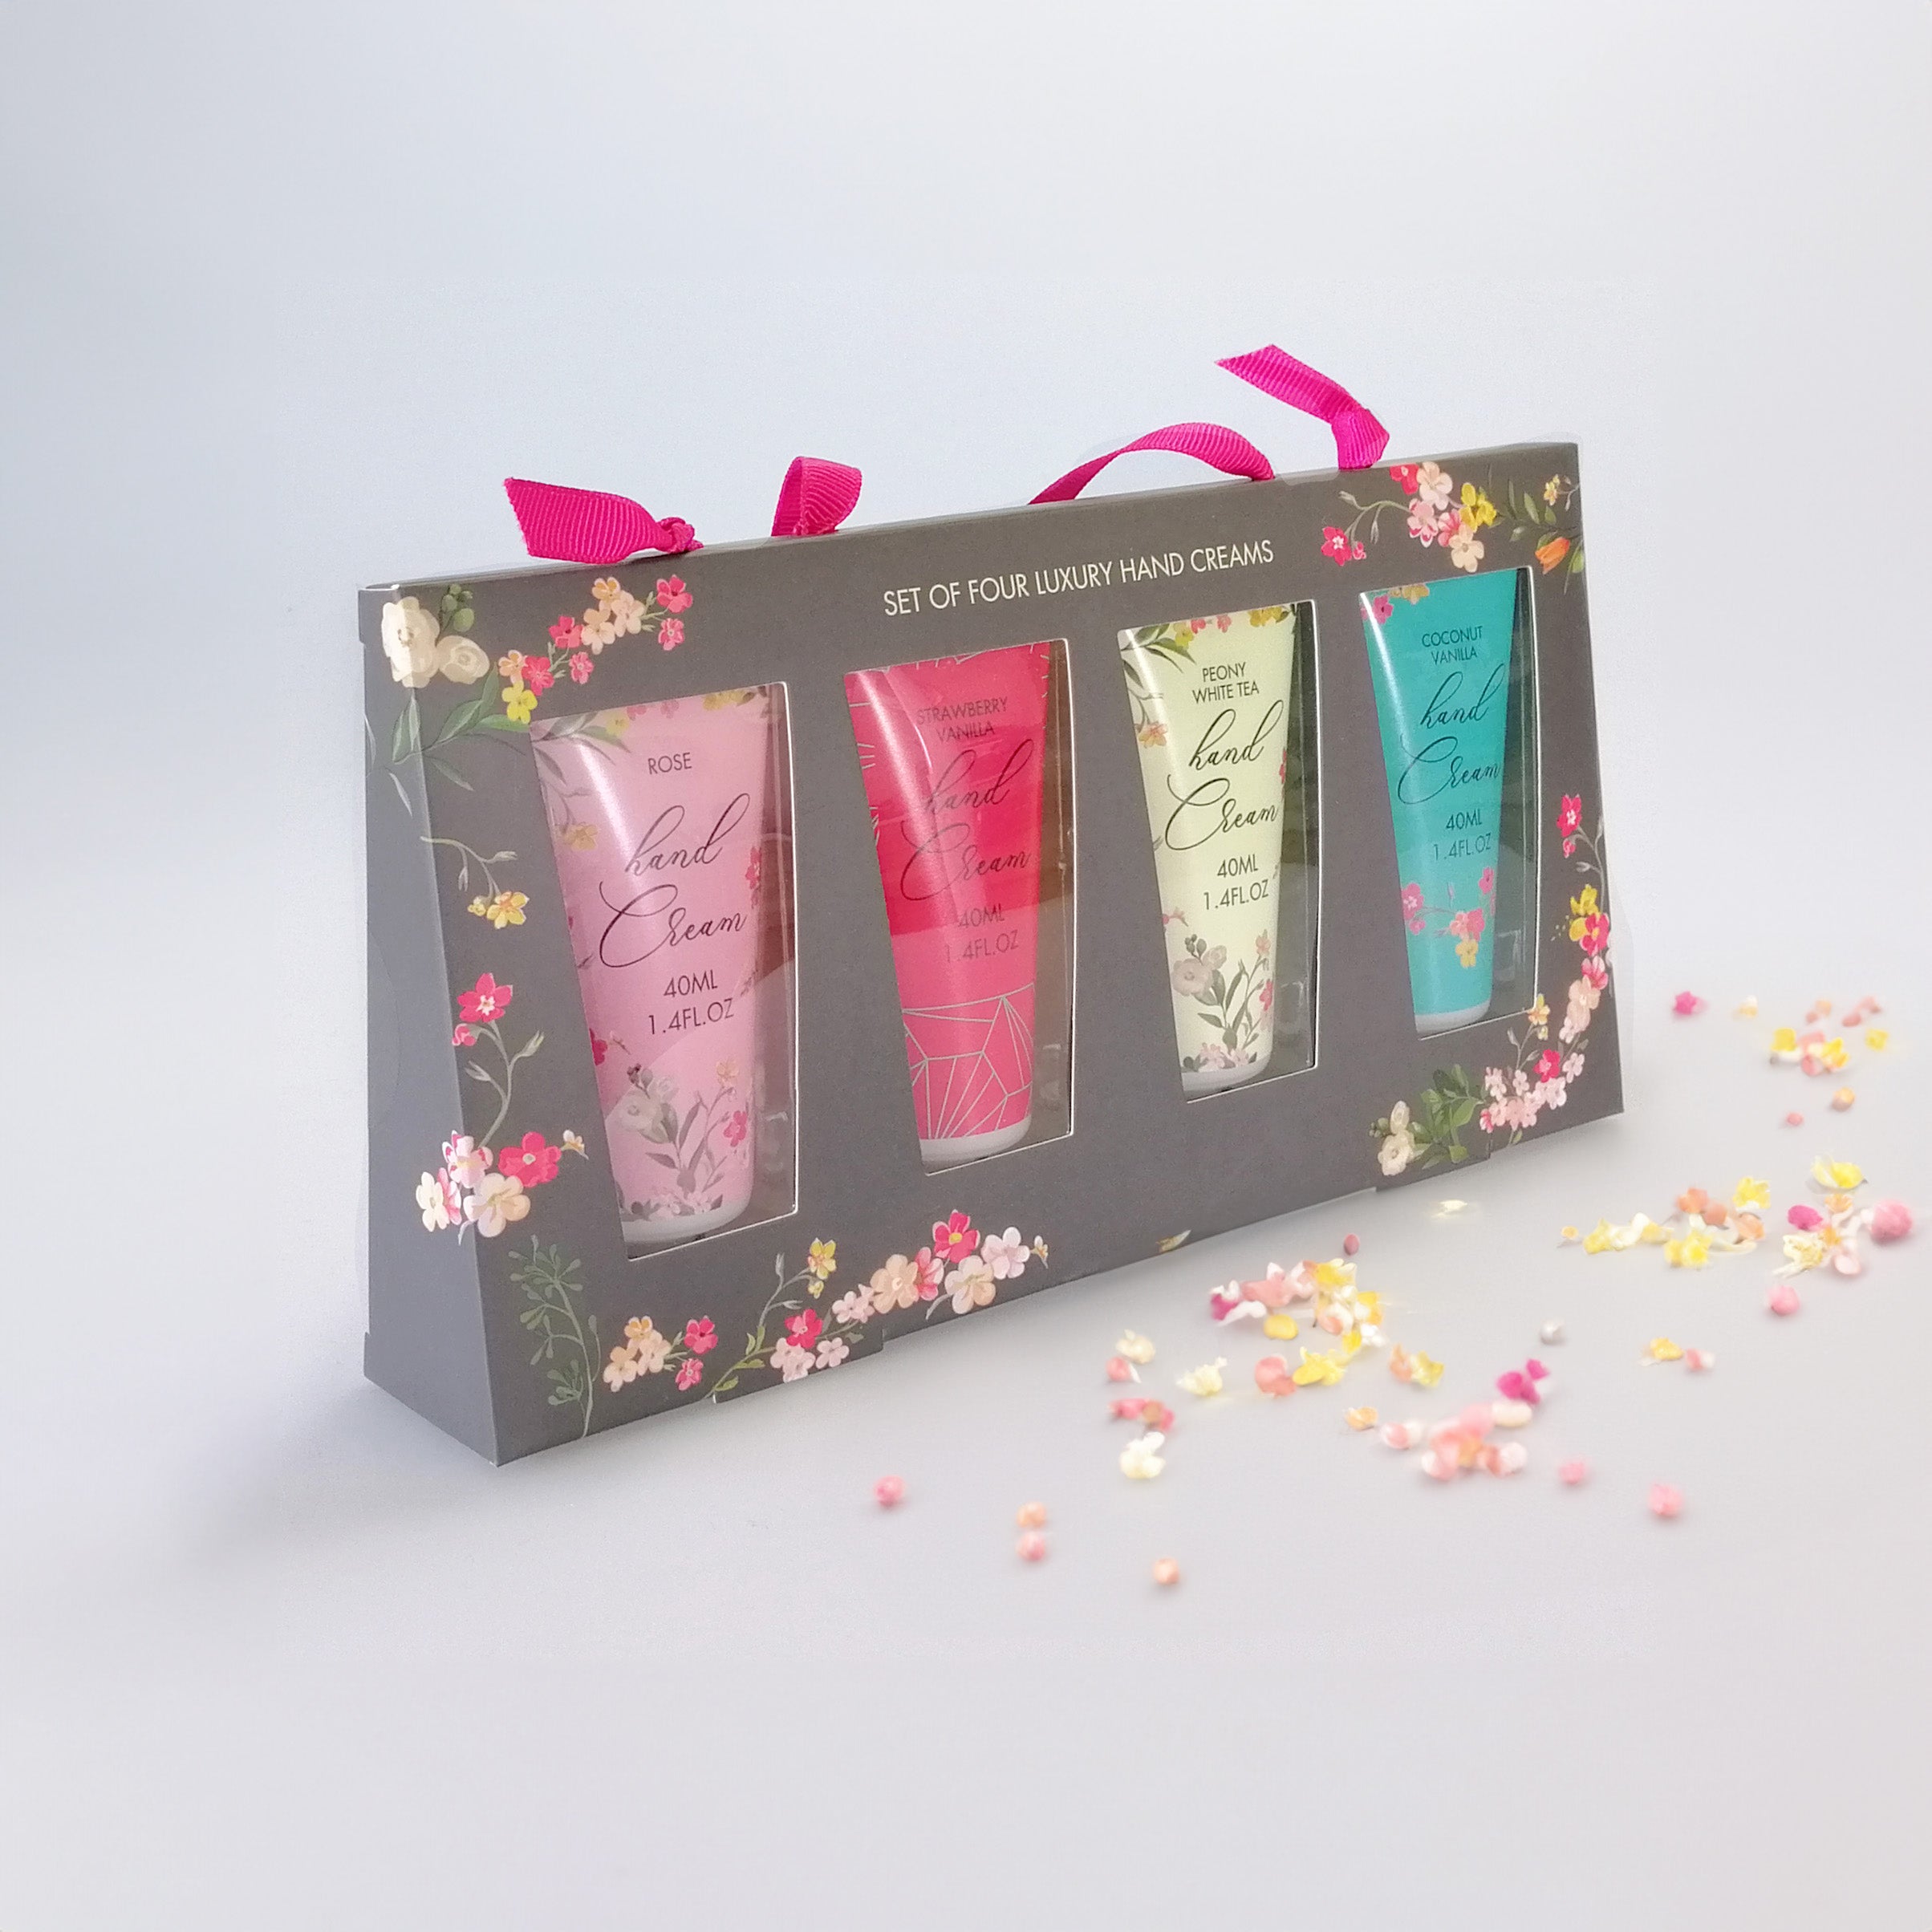 Luxury Scented Hand Creams - Gift Set of 4